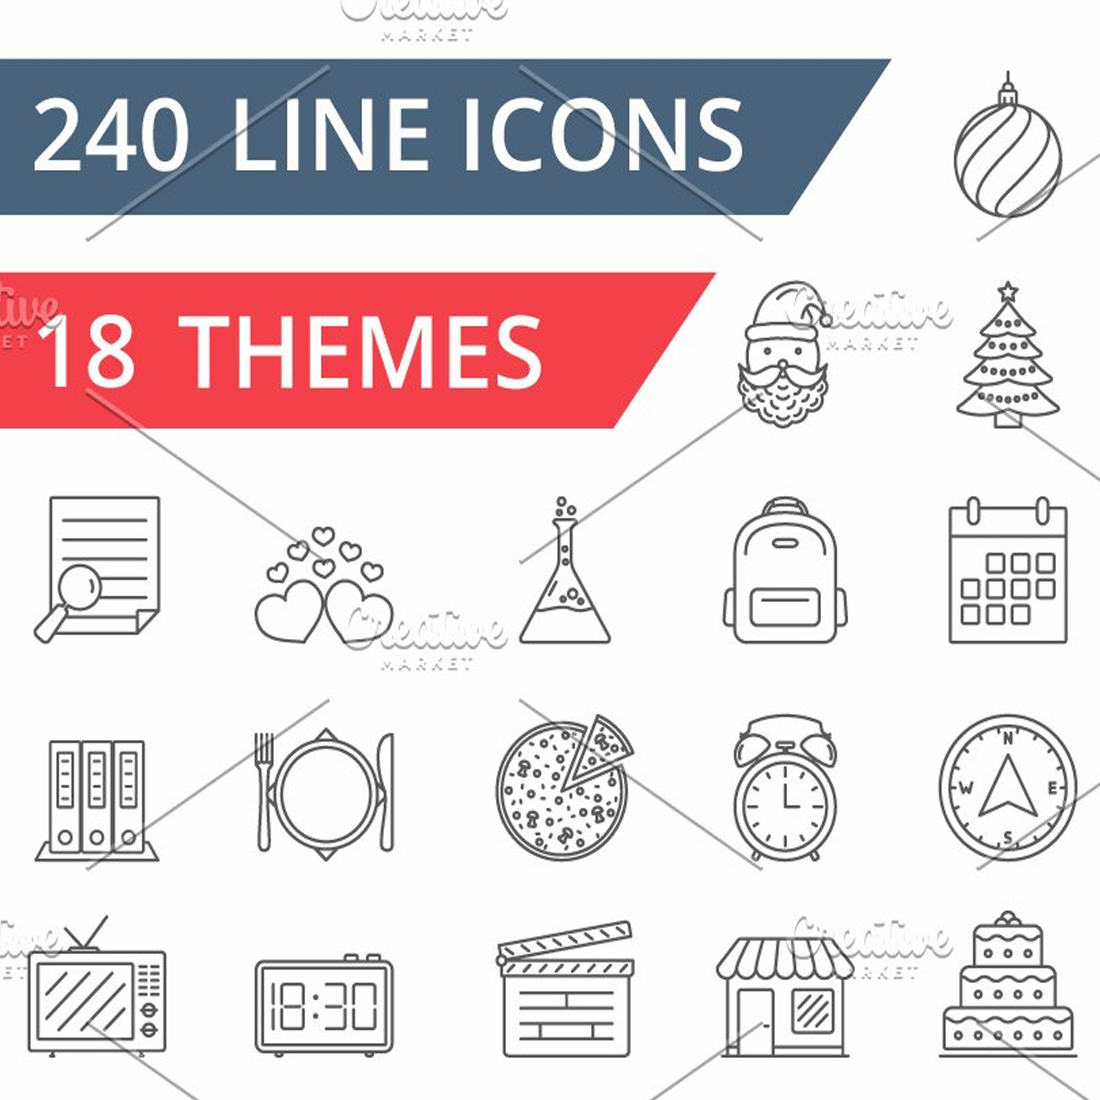 Images preview line icons collection.